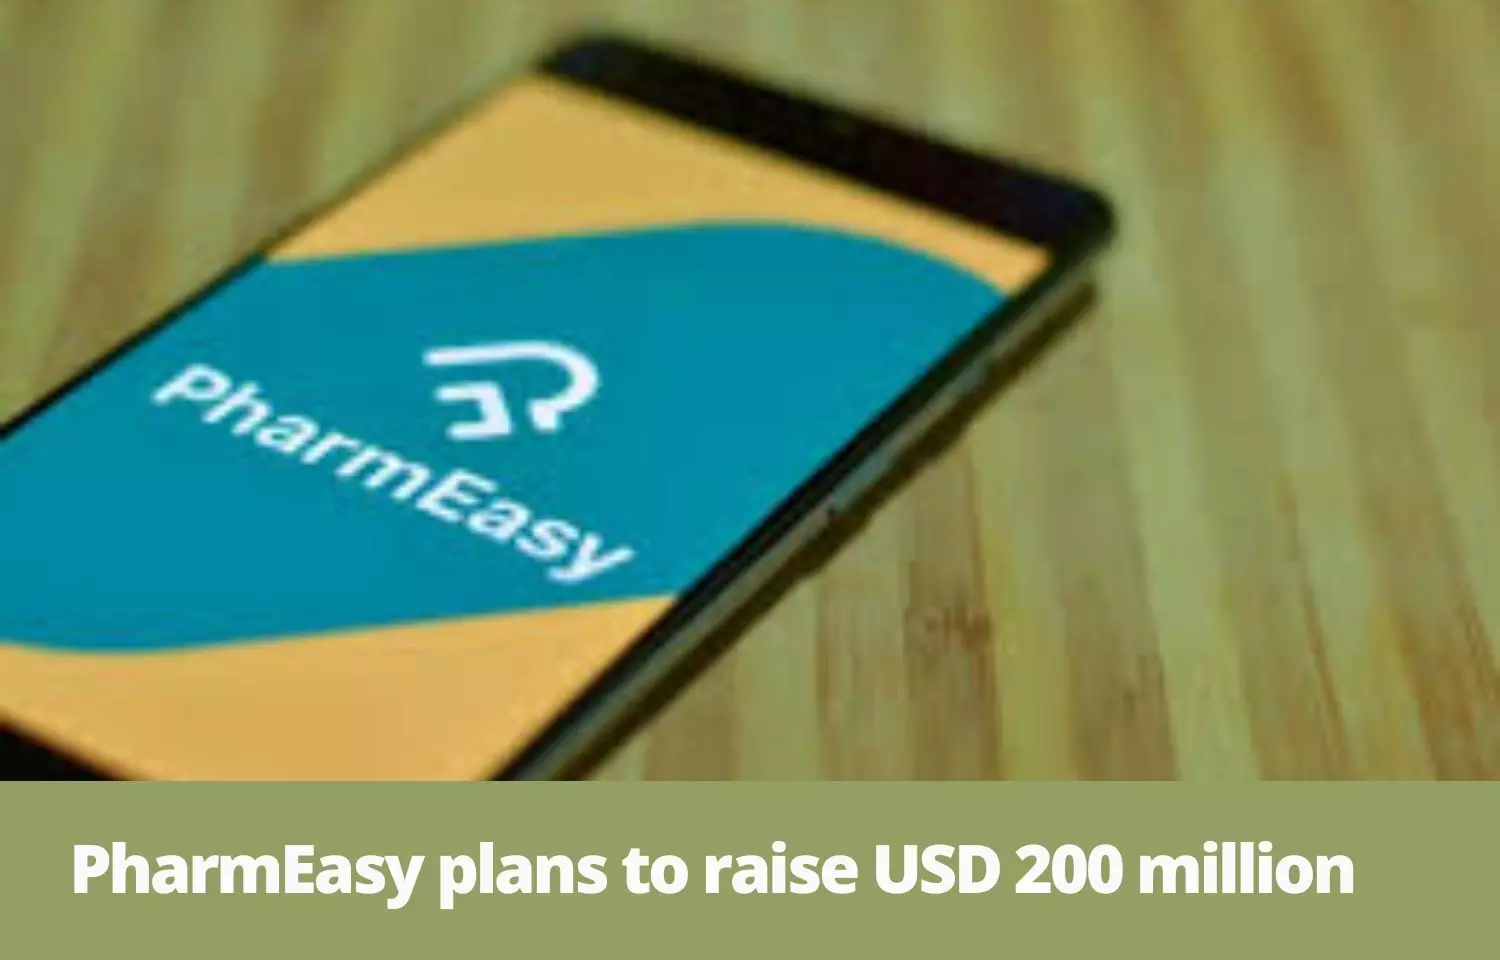 PharmEasy plans to raise USD 200 million at lower valuations